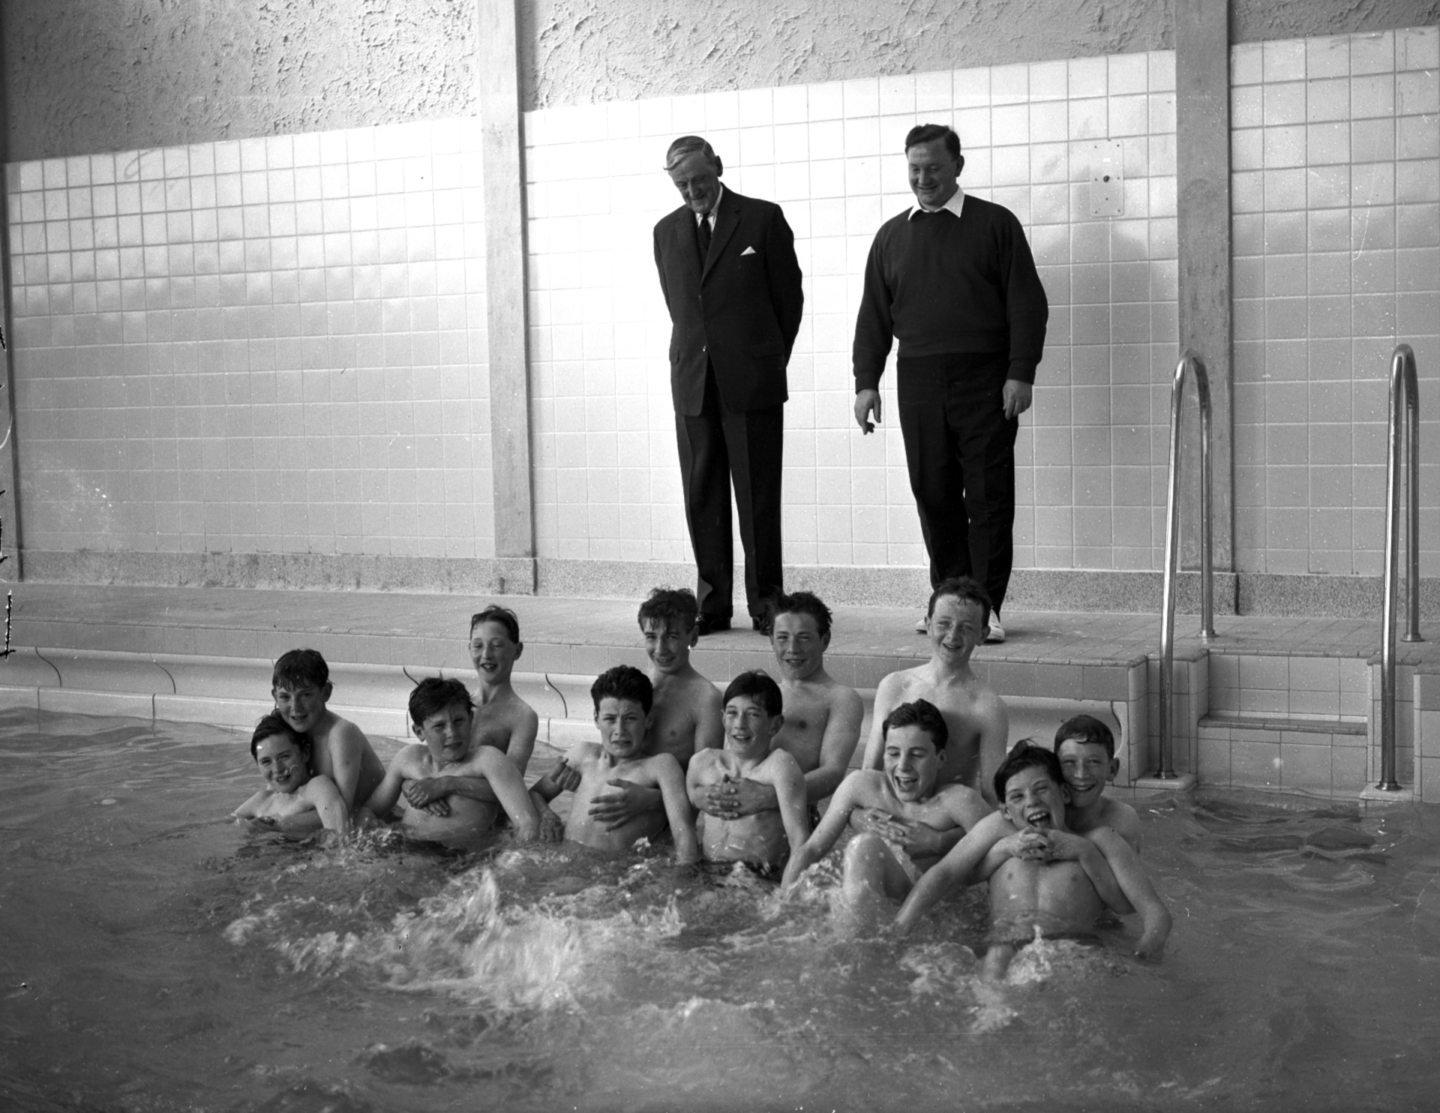 Pupils taking part in a swimming display at the opening of Summerhill School in April 1962.